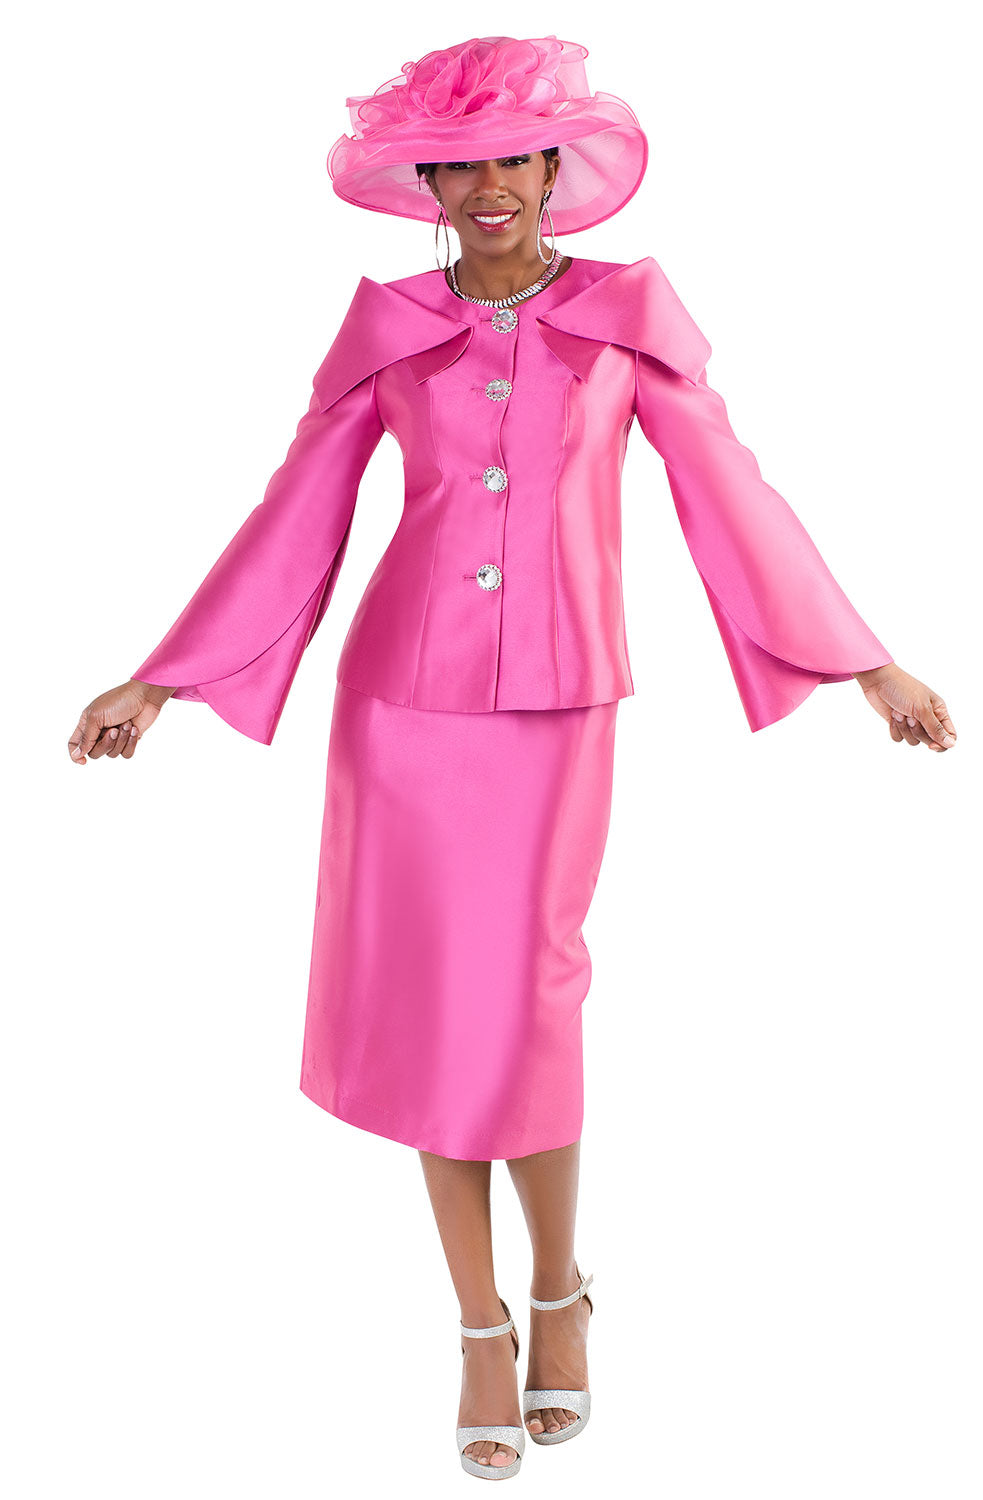 Tally Taylor Suit 4570C-Fuchsia - Church Suits For Less